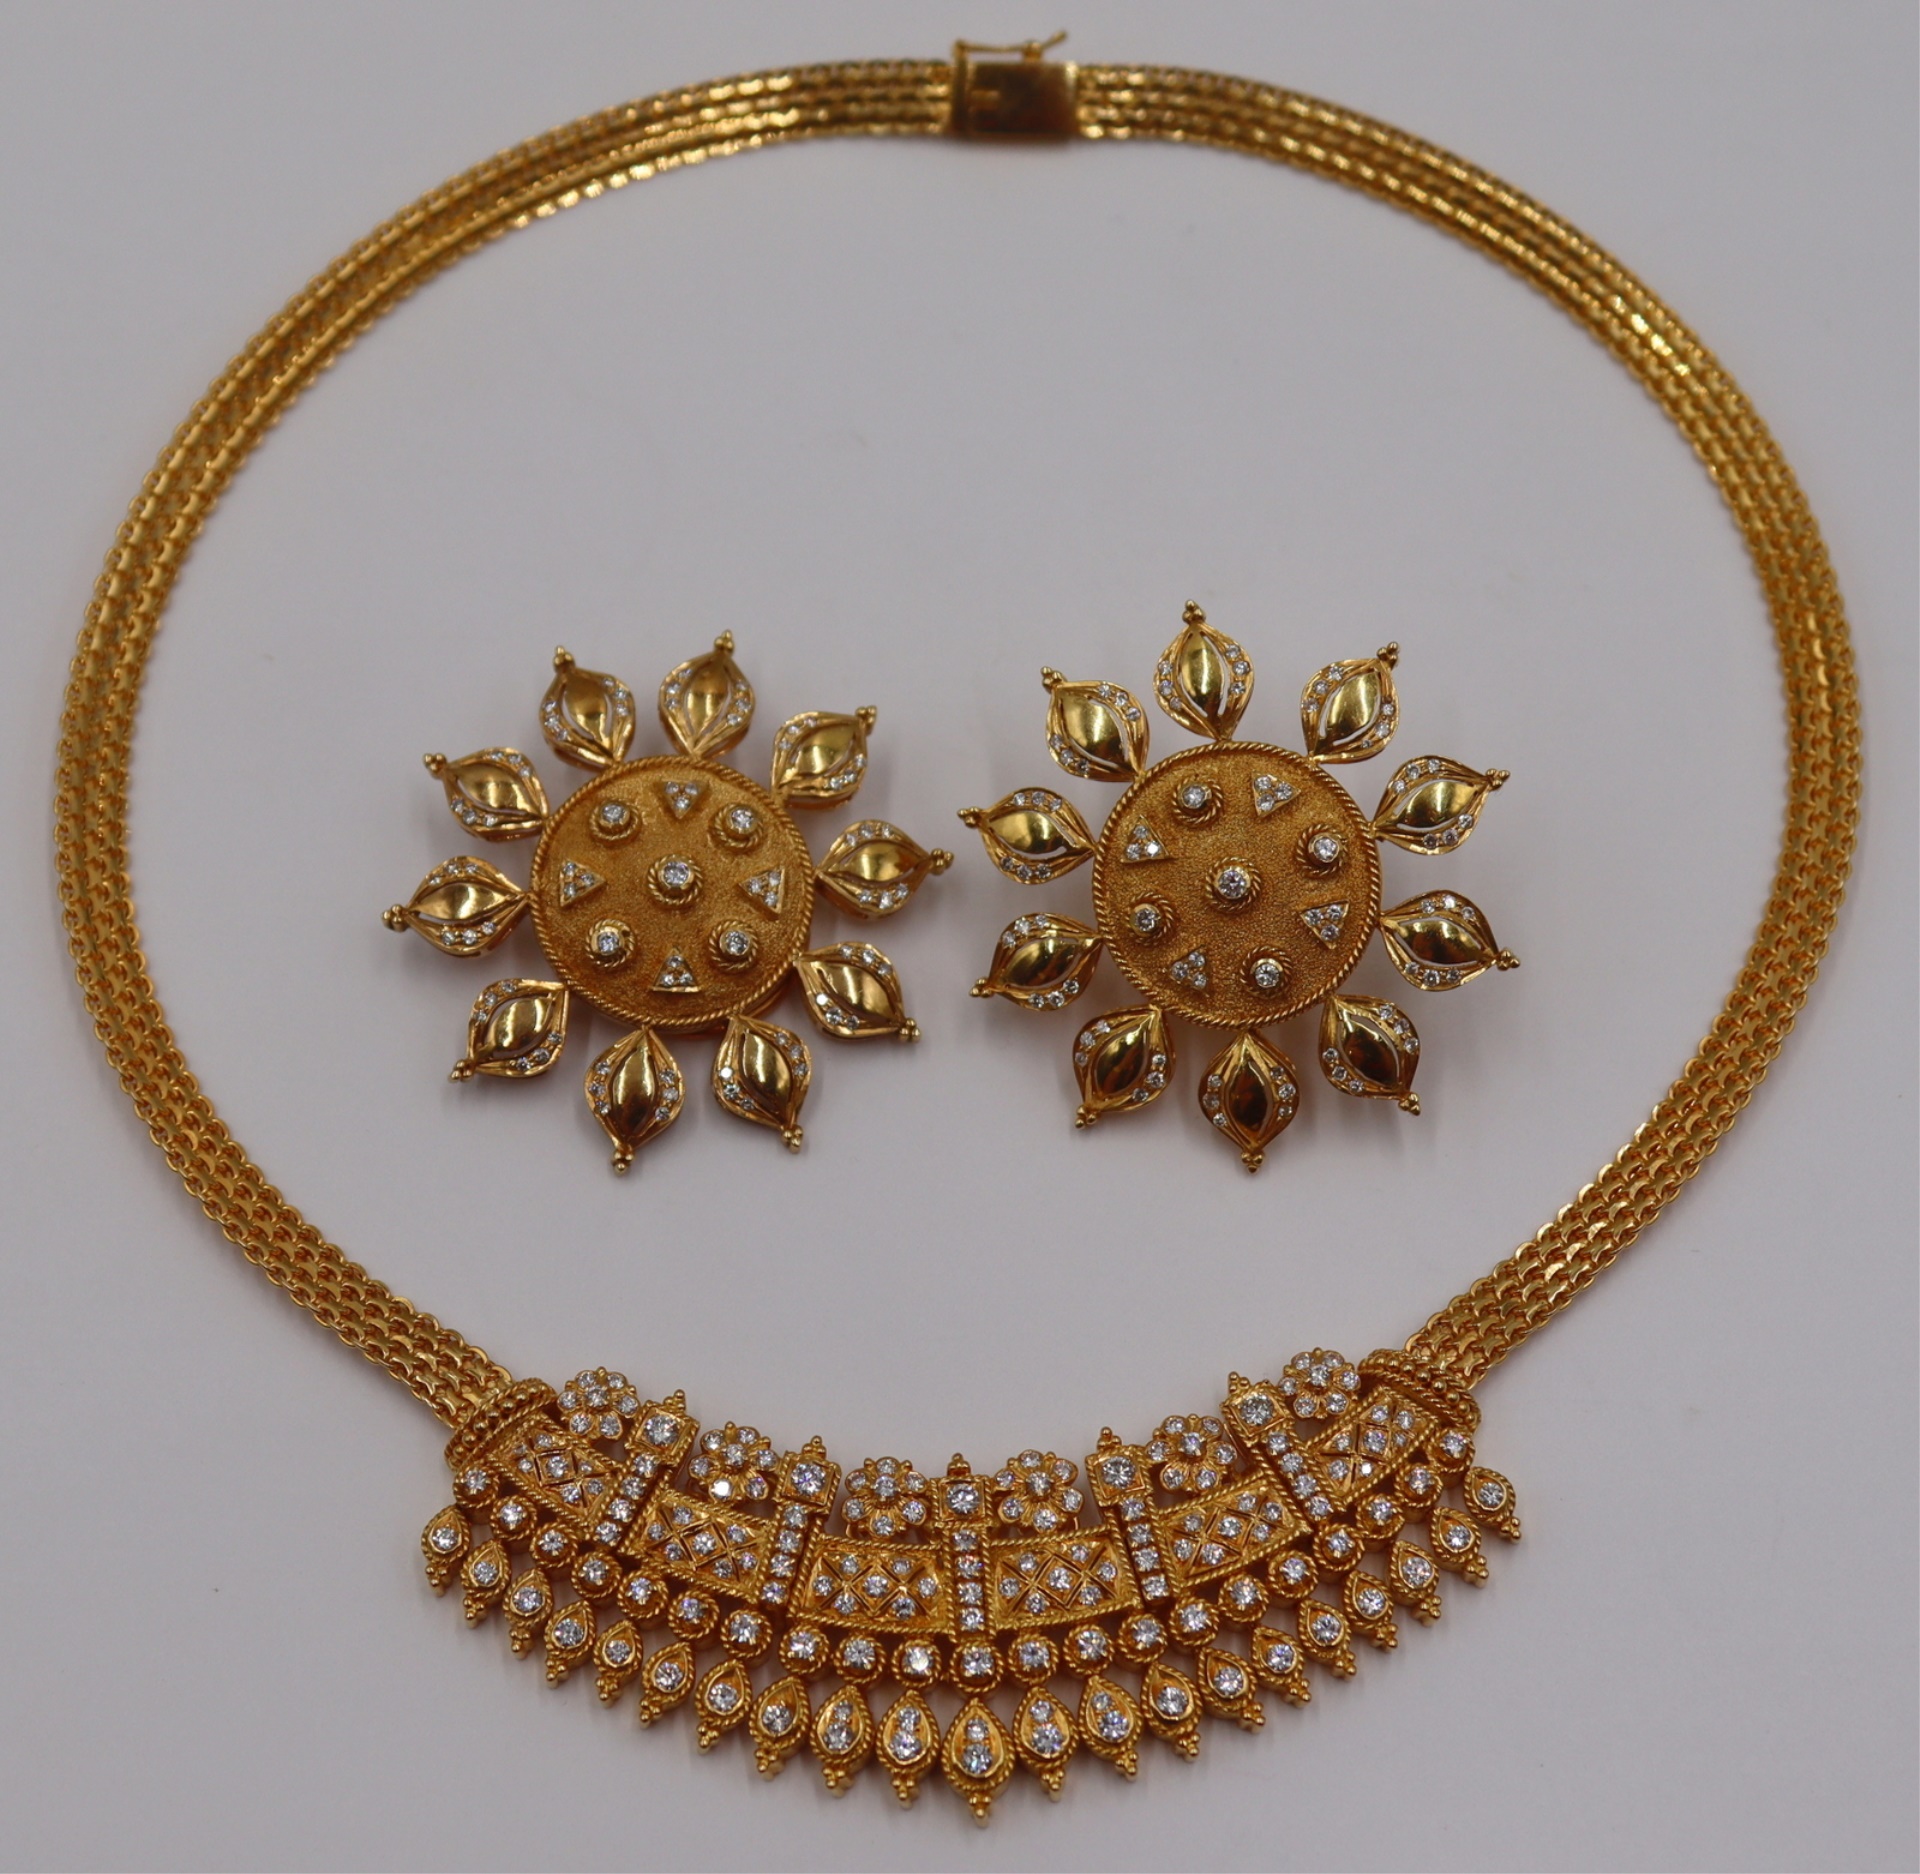 JEWELRY INDIAN STYLE 18KT GOLD 3bcbd3